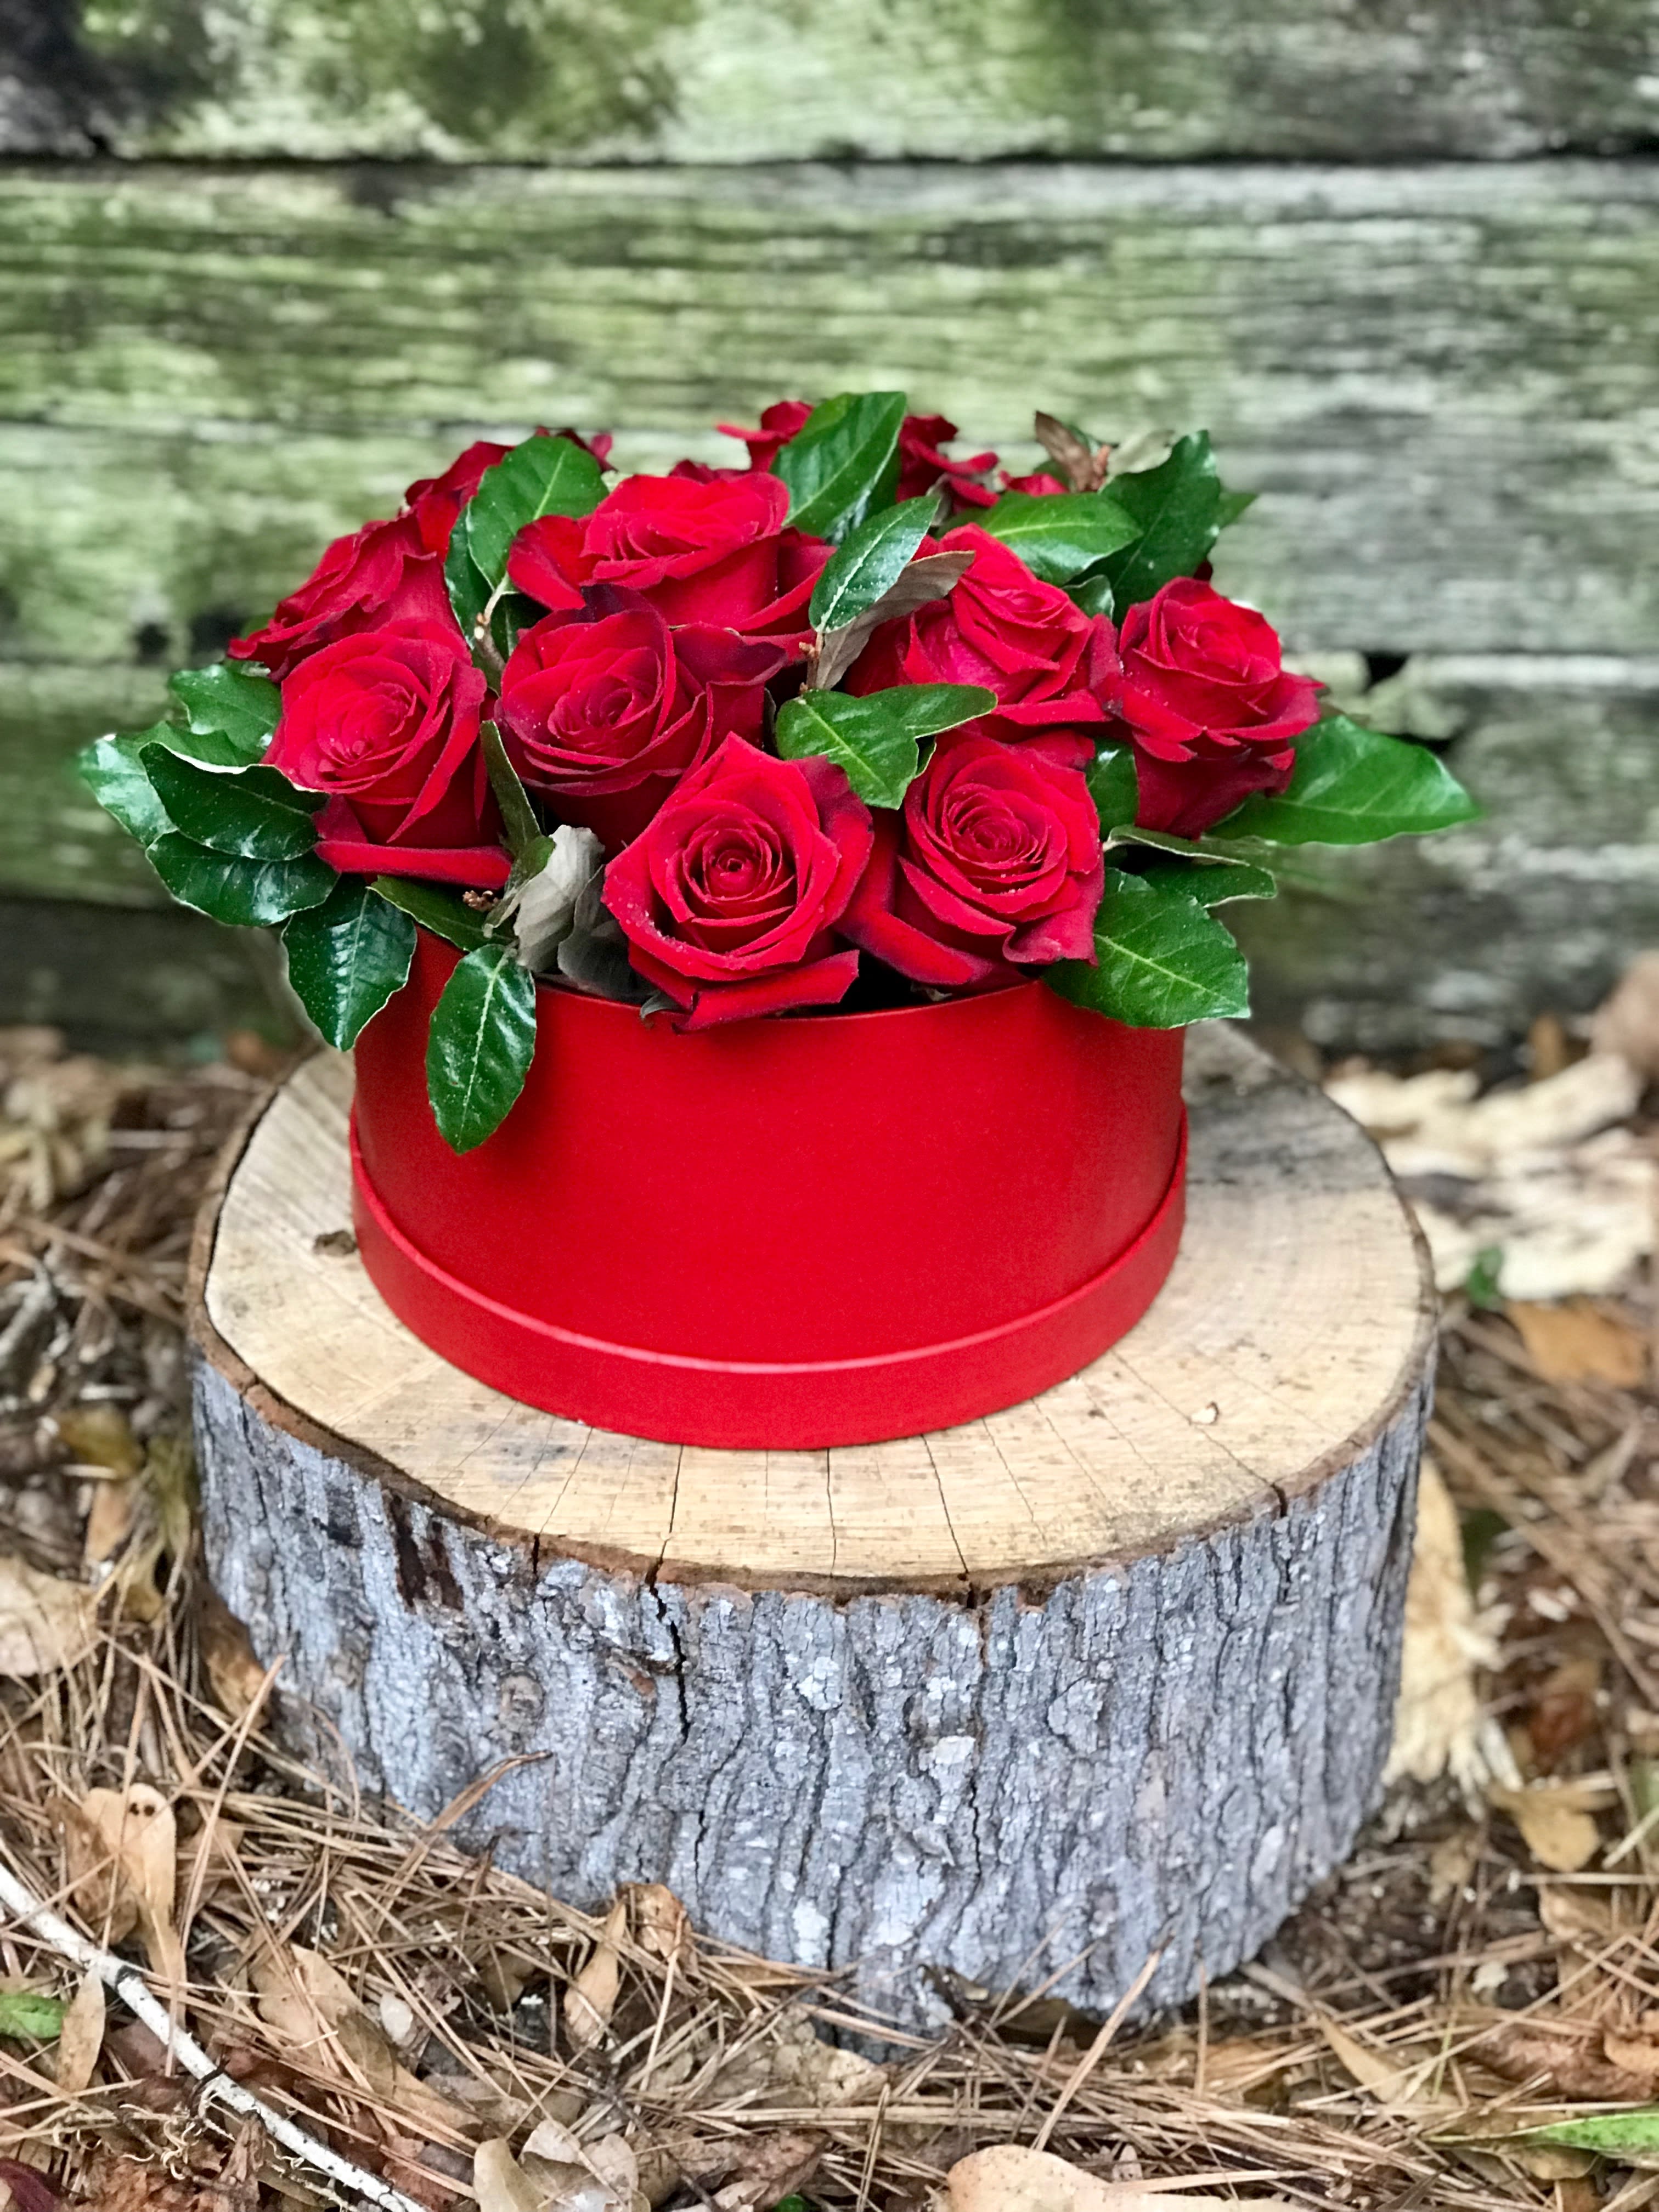 The Red Rose Hat Box 2 in Oakland Park, FL